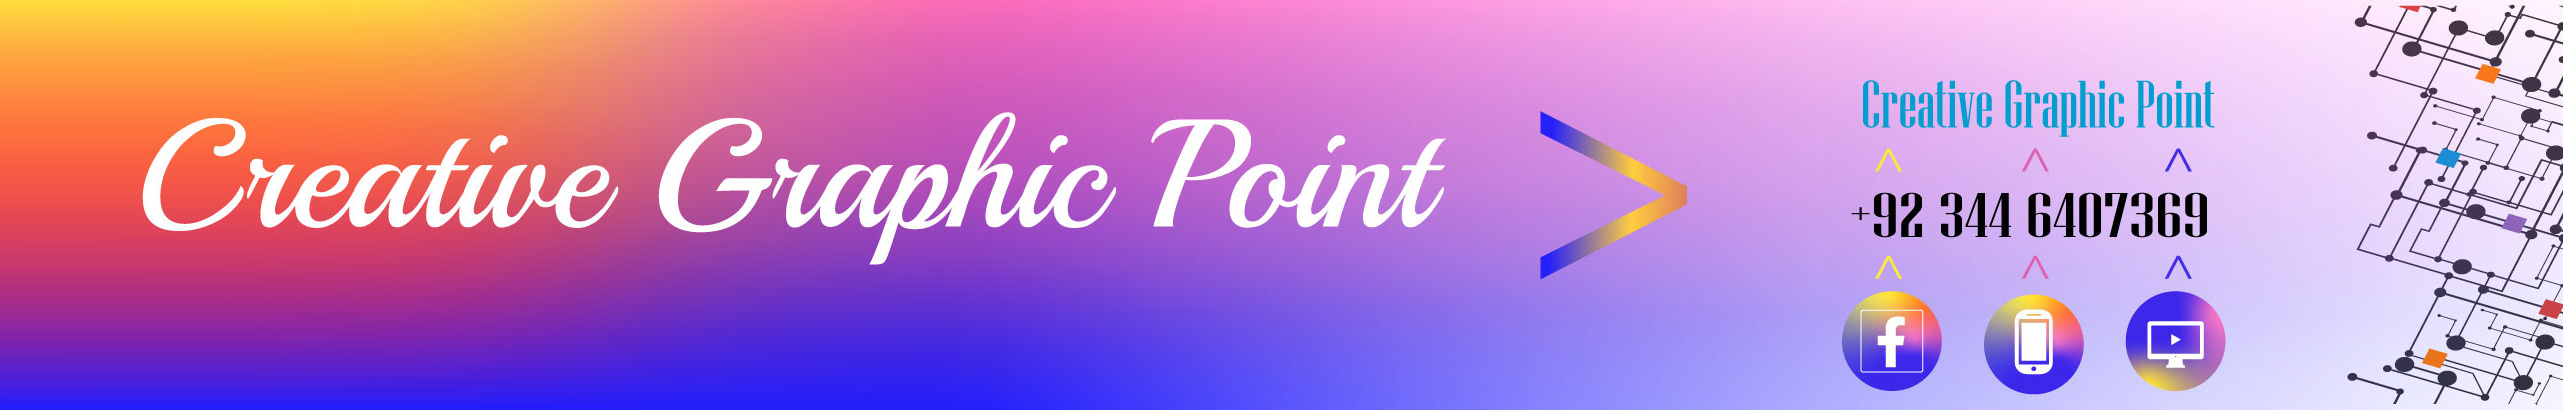 Creative Graphic points profilbanner